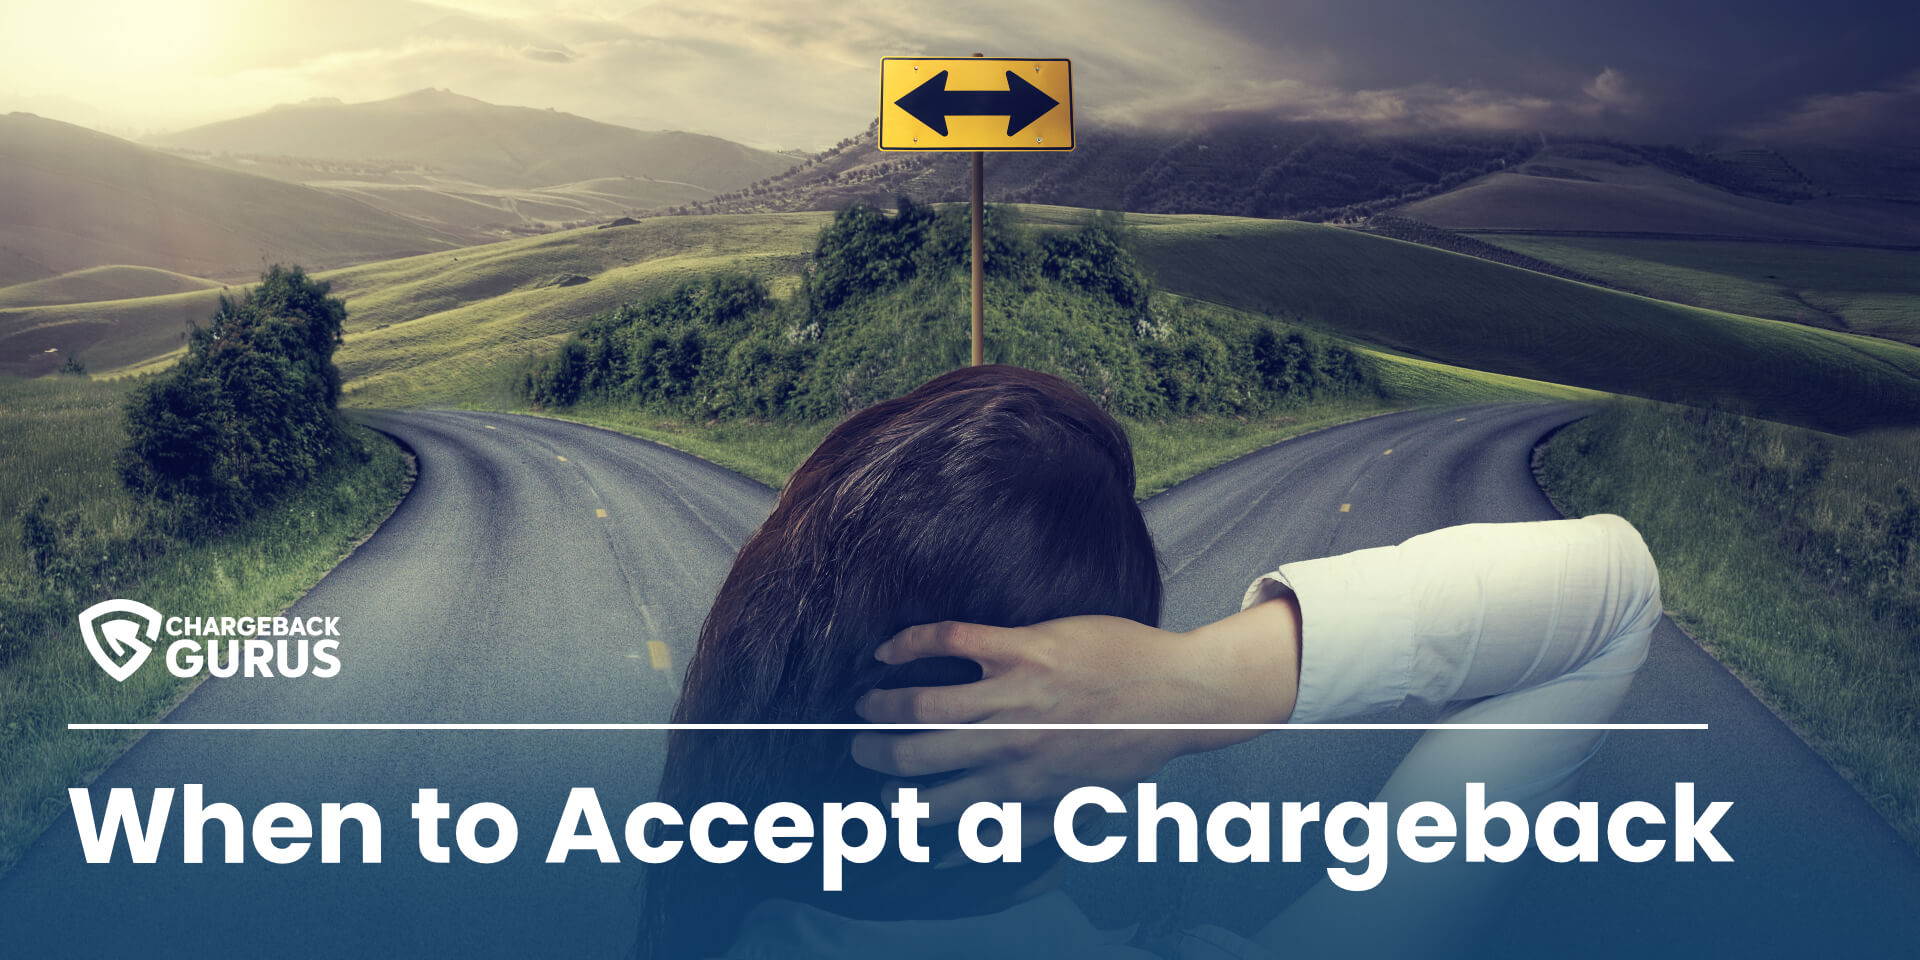 fight or accept chargeback